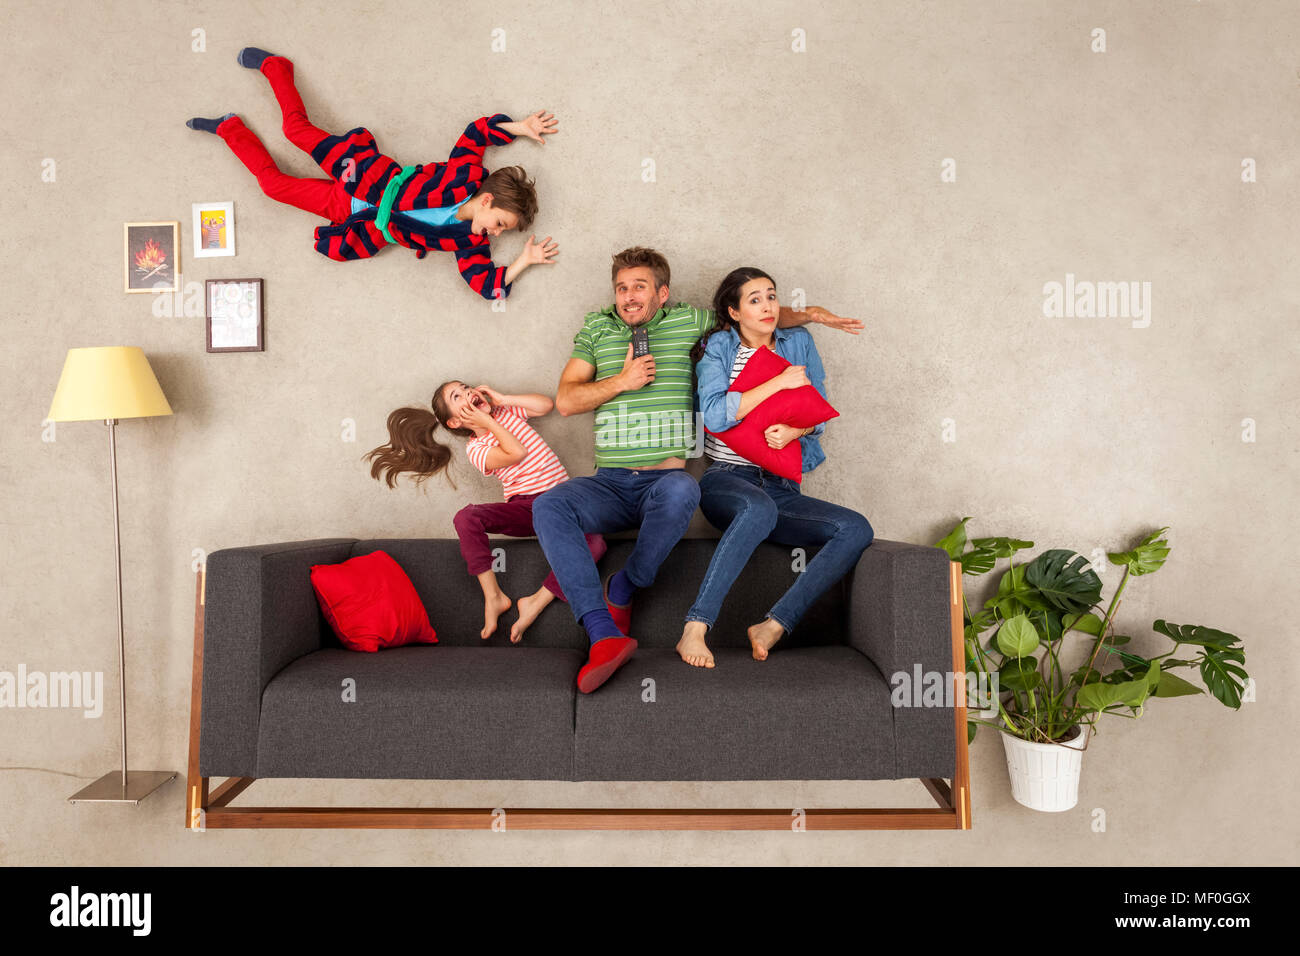 Family with two children watching TV together Stock Photo